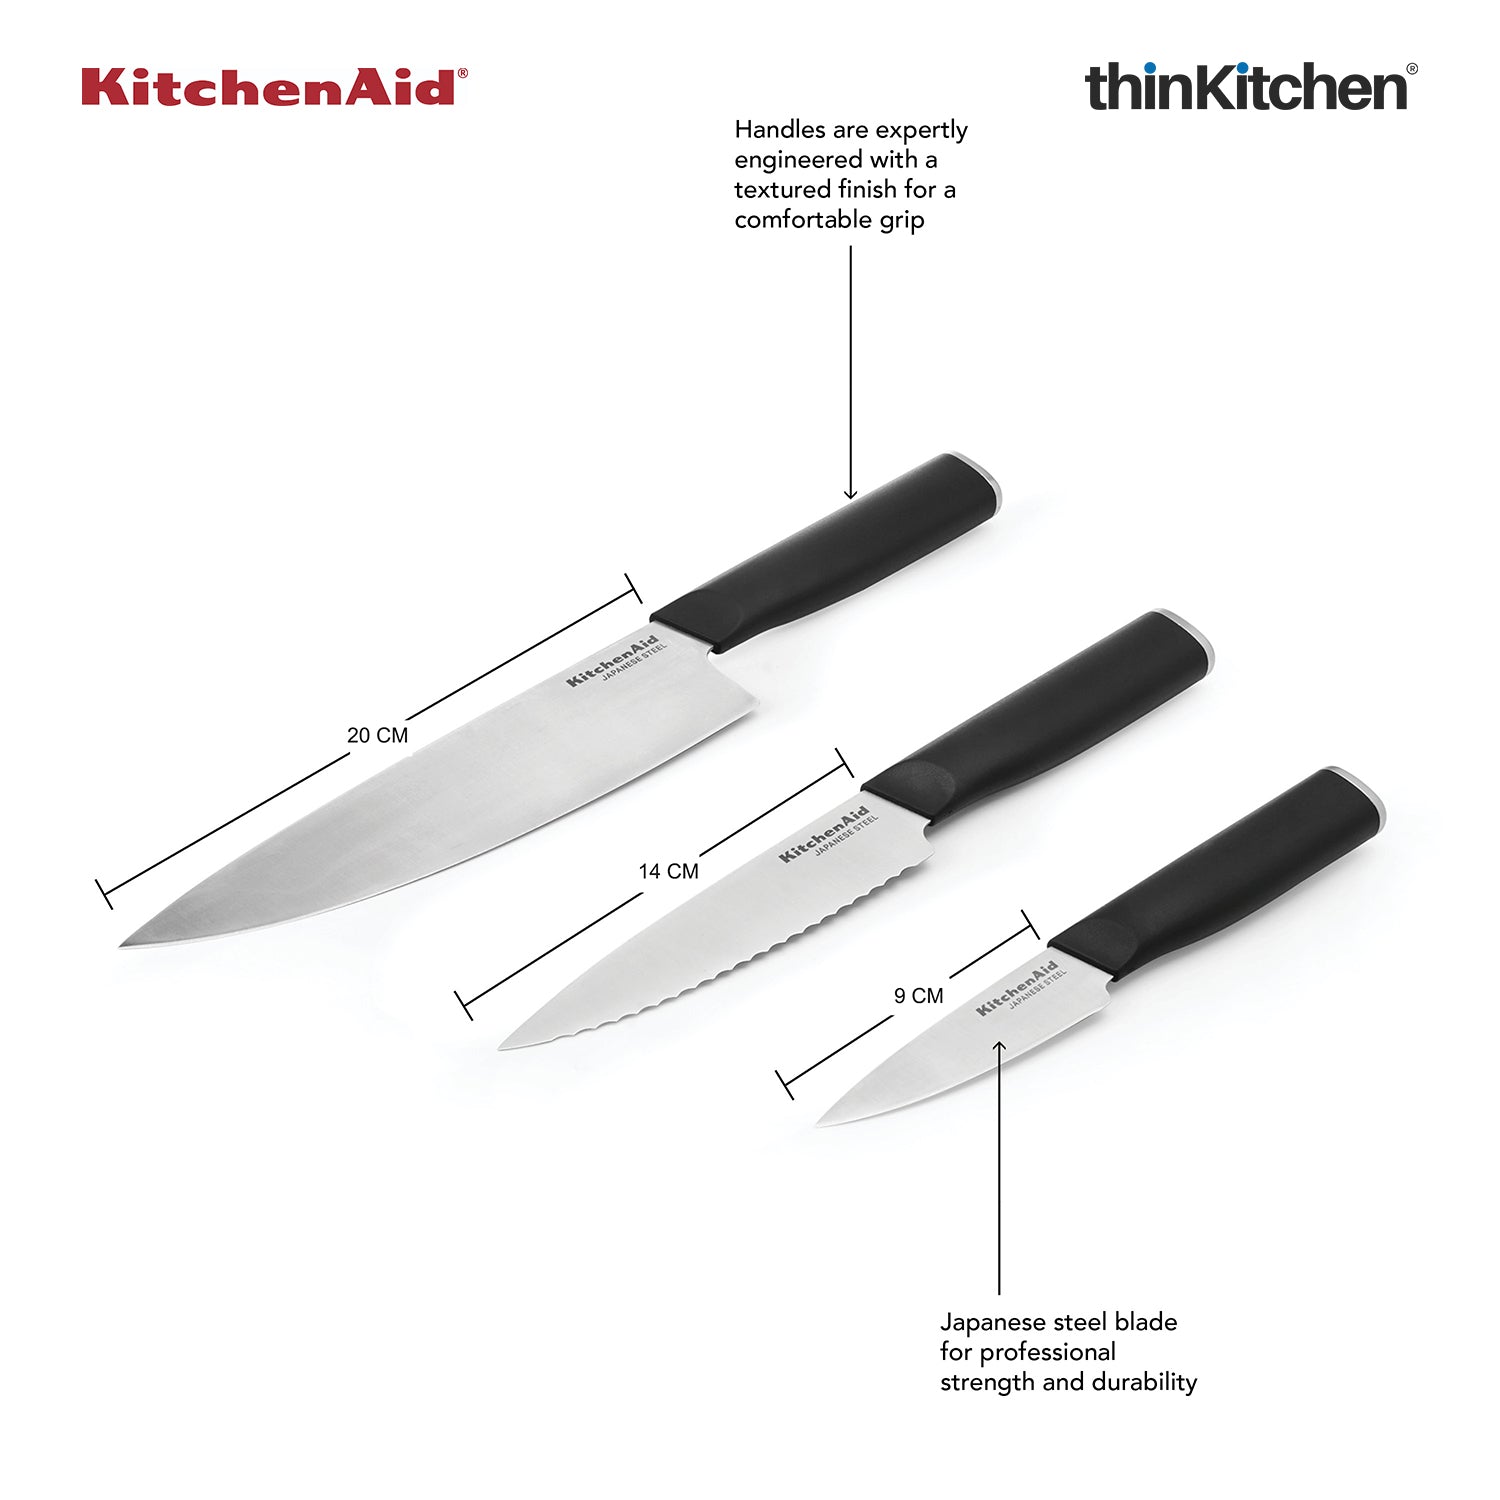 Kitchenaid Classic Ceramic Chef Knife with Endcap and Blade Cover